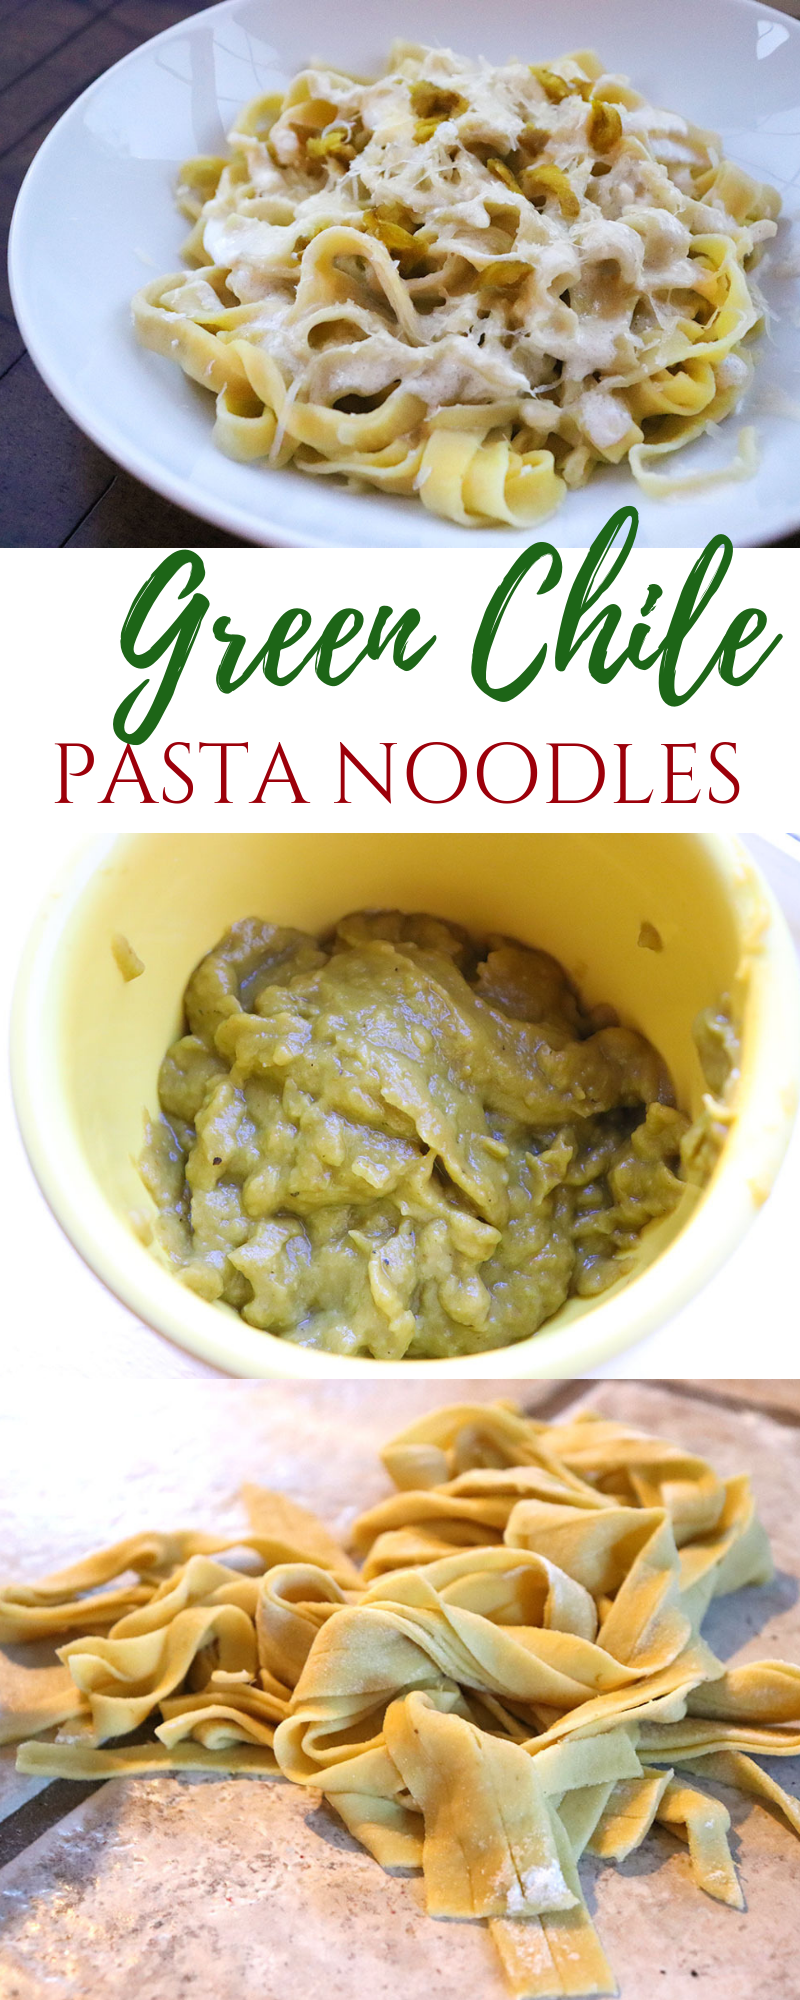 Green Chile Pasta Noodles | NewMexicanFoodie.com